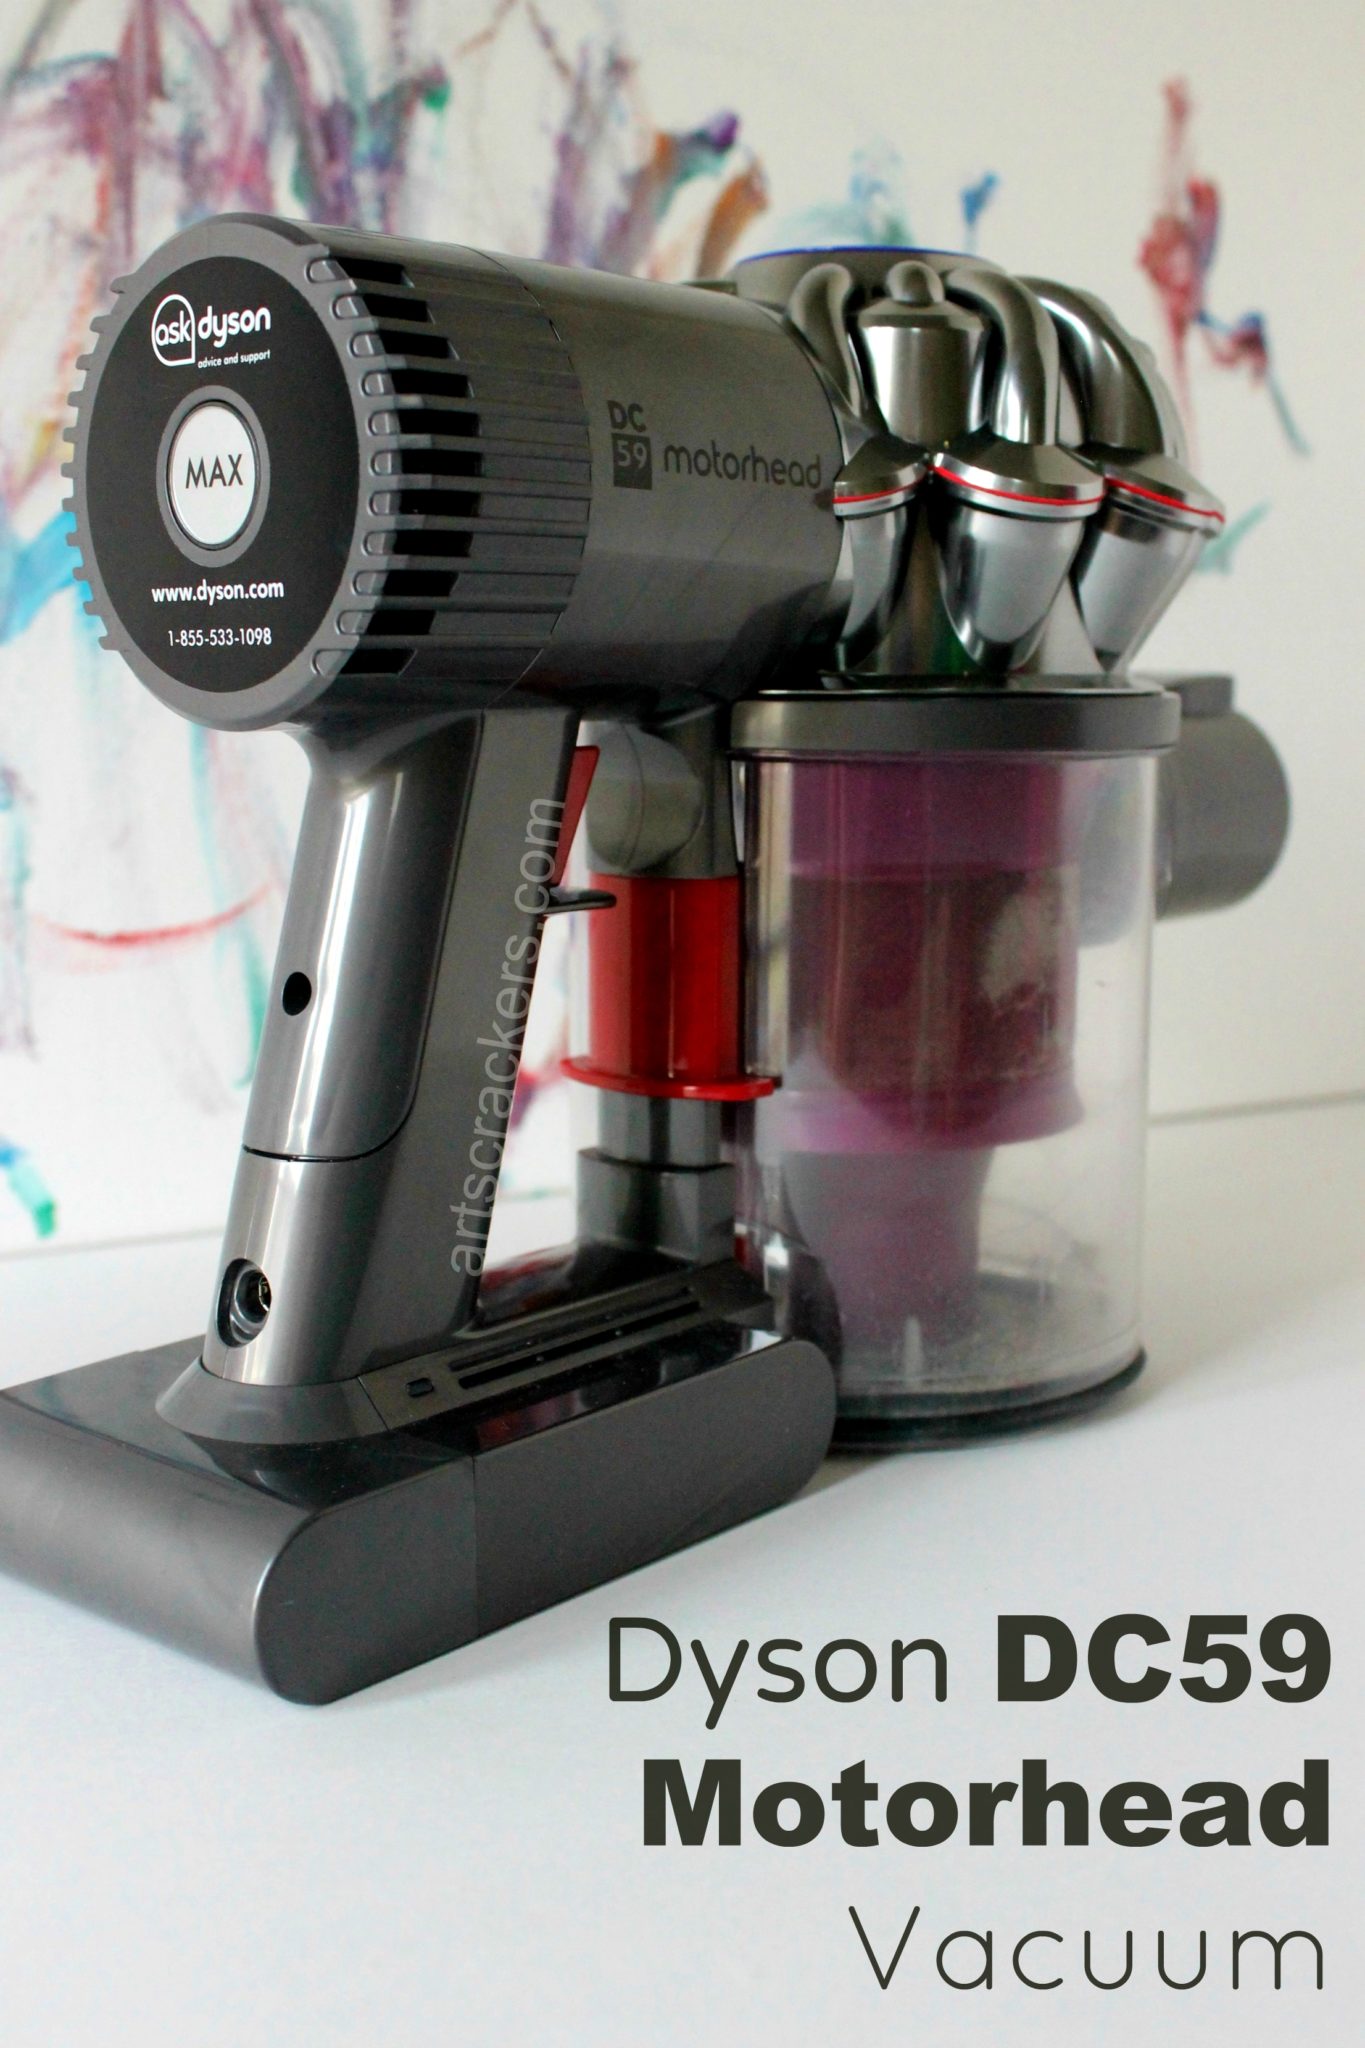 Dyson DC59 Motorhead Vacuum. Click on the picture to read the review.